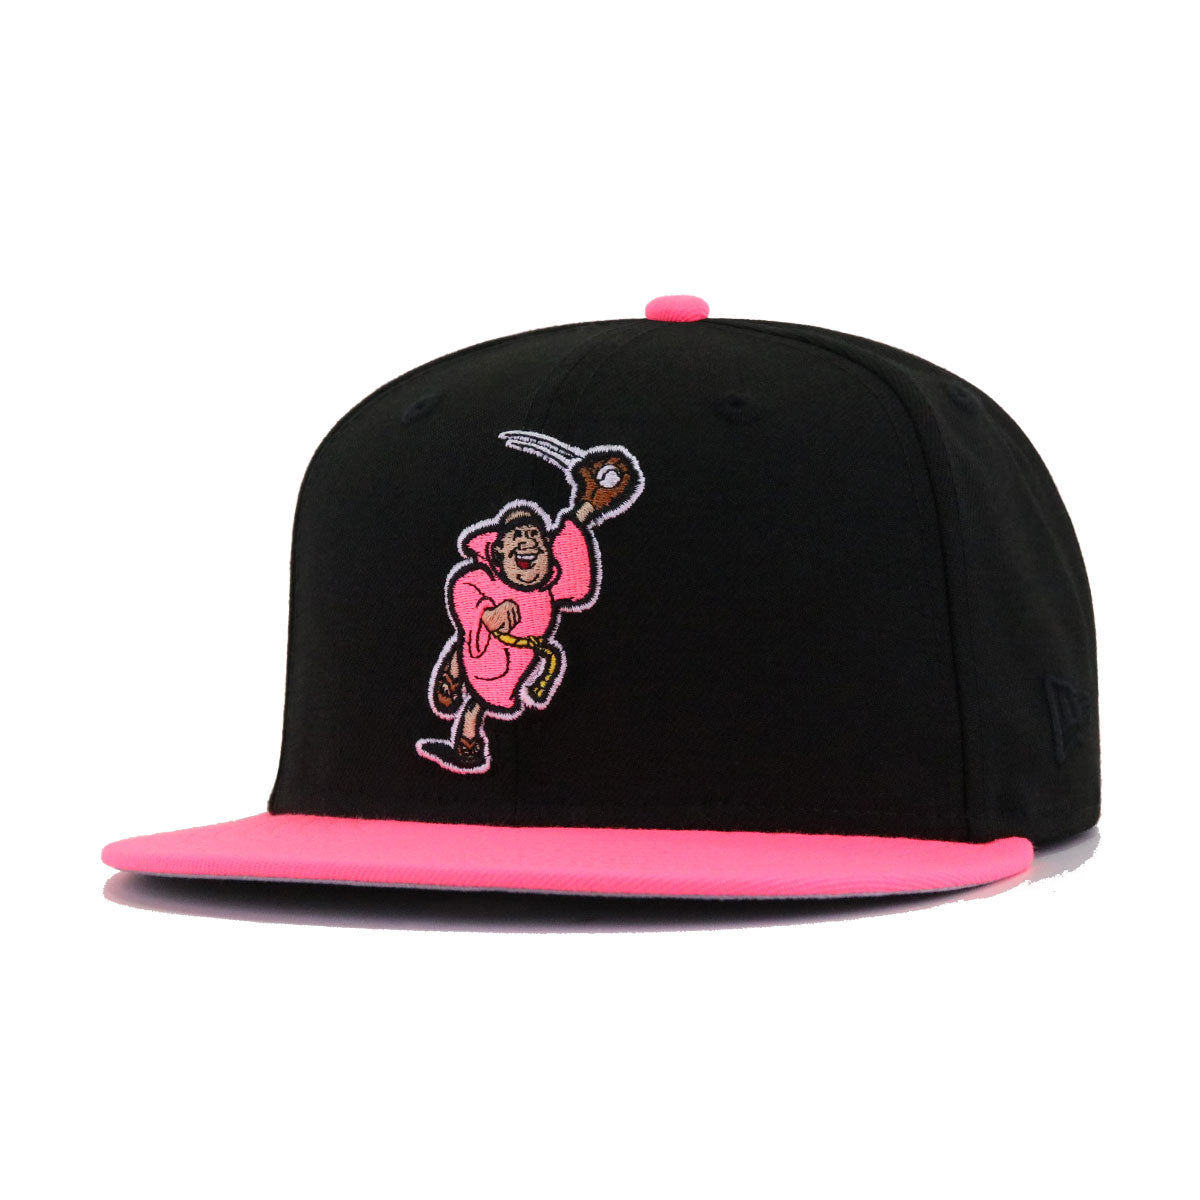 New Era 59Fifty San Diego Padres City Connect Friar Hat - Pink